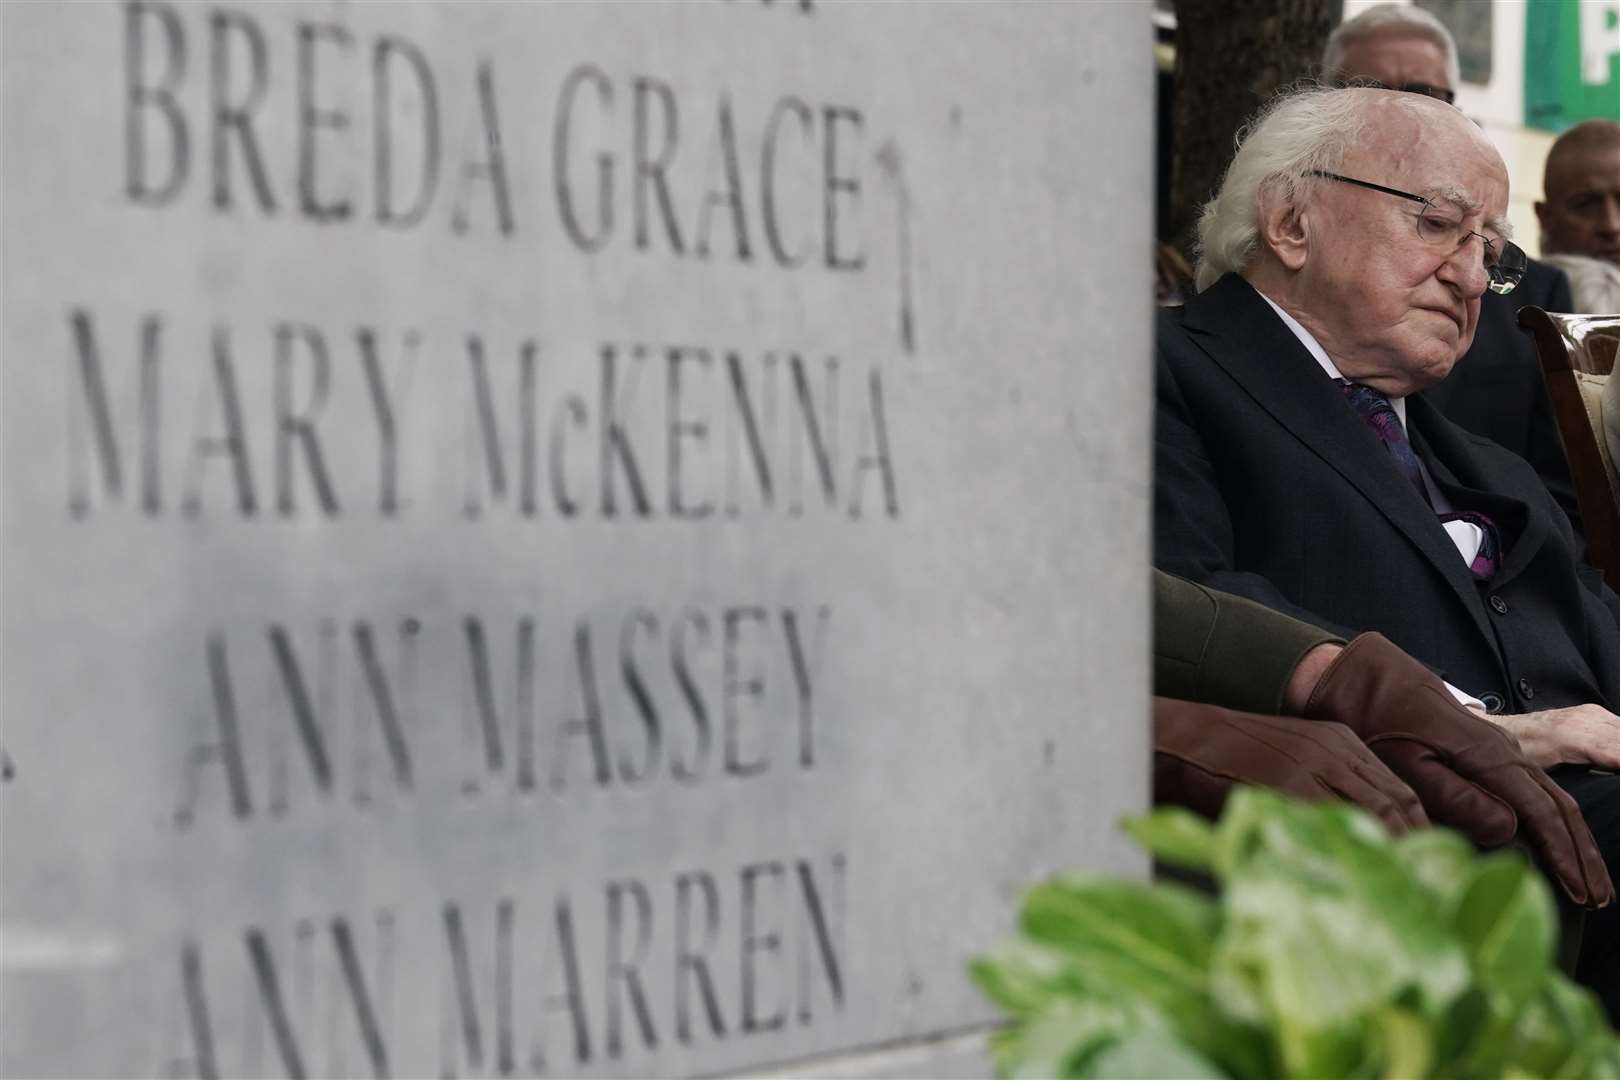 President of Ireland Michael D Higgins during wreath laying ceremony at the Memorial to the victims of the Dublin and Monaghan bombings (Brian Lawless/PA)